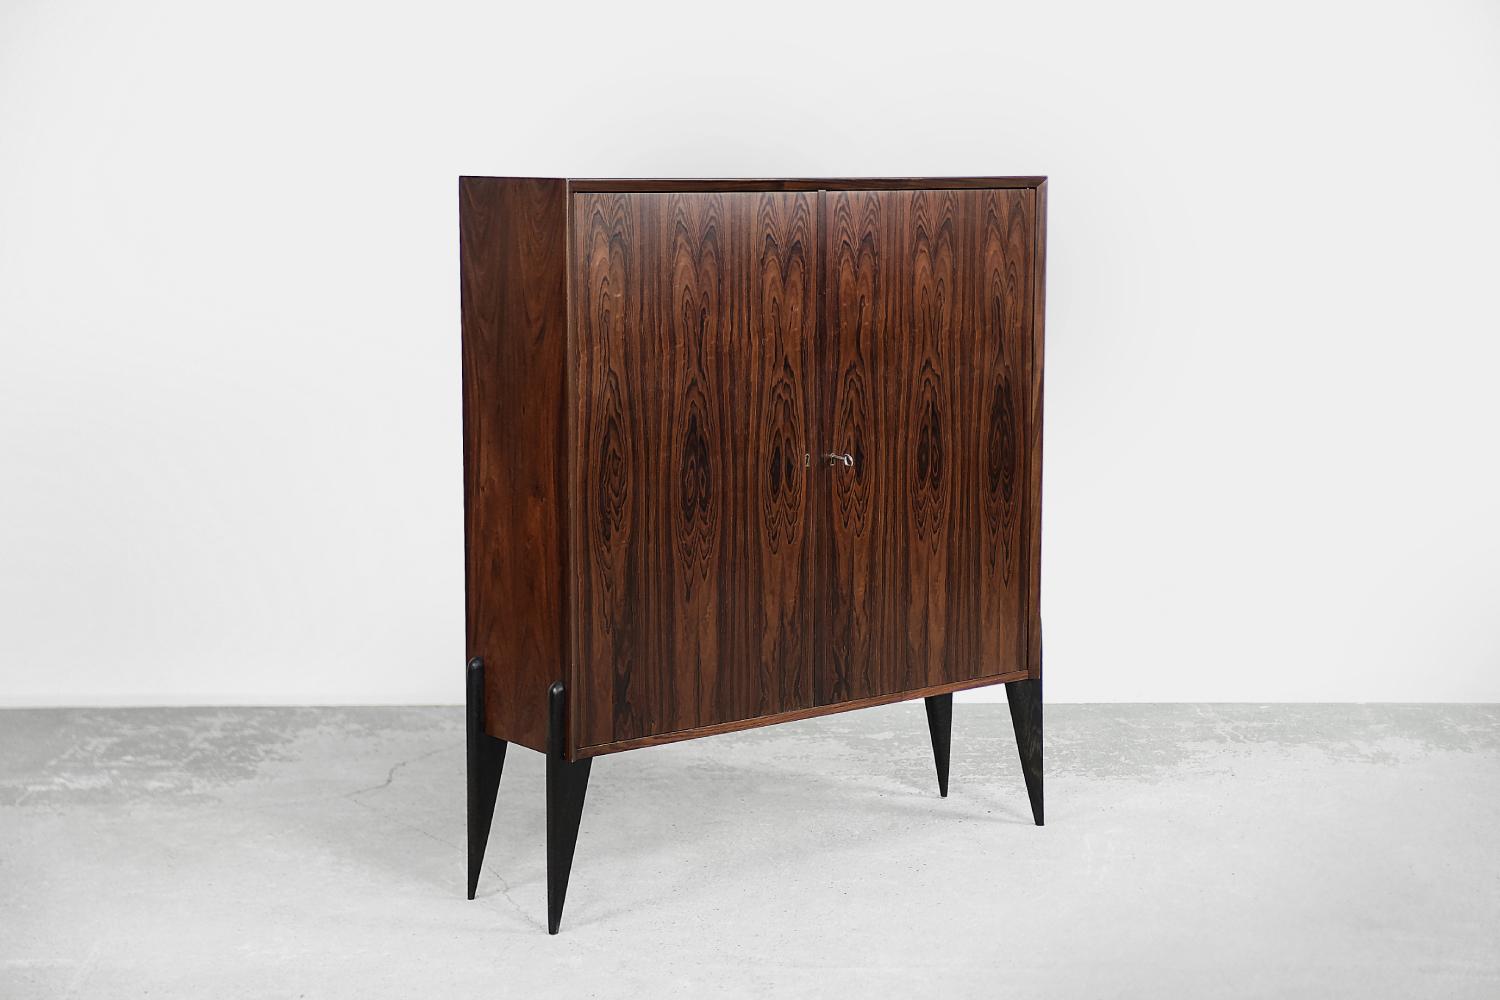 This modernist, narrow cabinet was made in Denmark during the 1960s. It was finished with precious rosewood with strongly marked grains. It has a pair of lockable doors. Inside, on both sides there are shelves whose height can be adjusted. The base